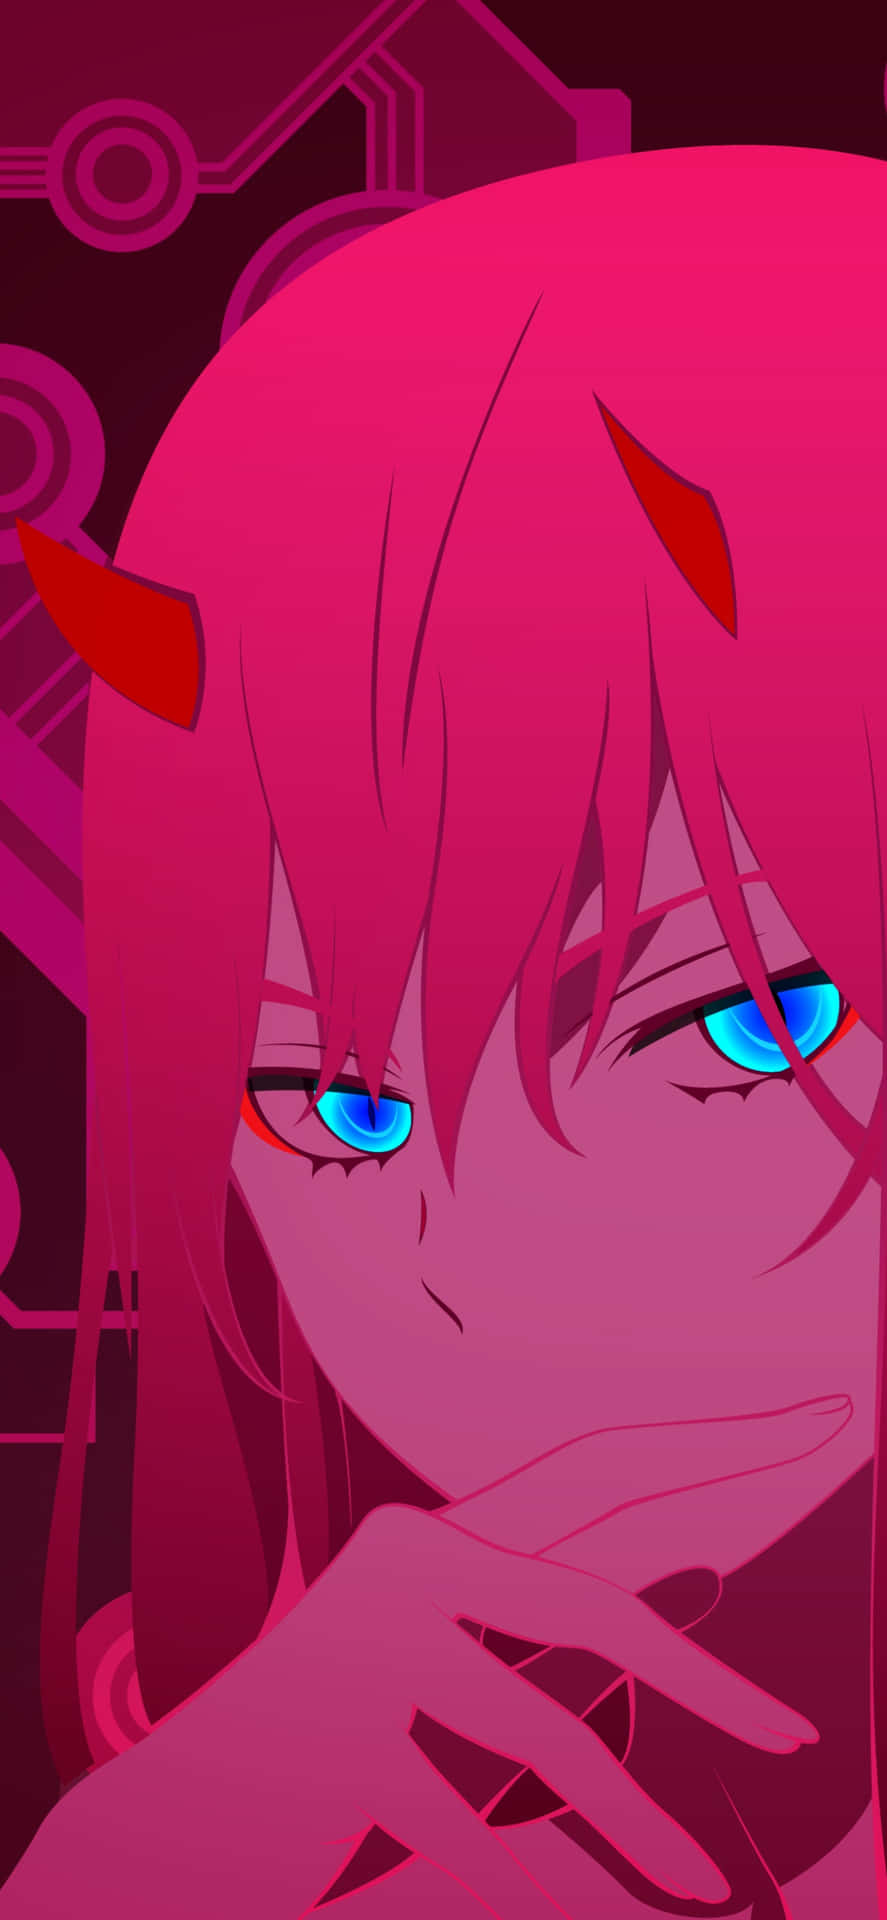 Zero Two from the anime Darling in the FranXX